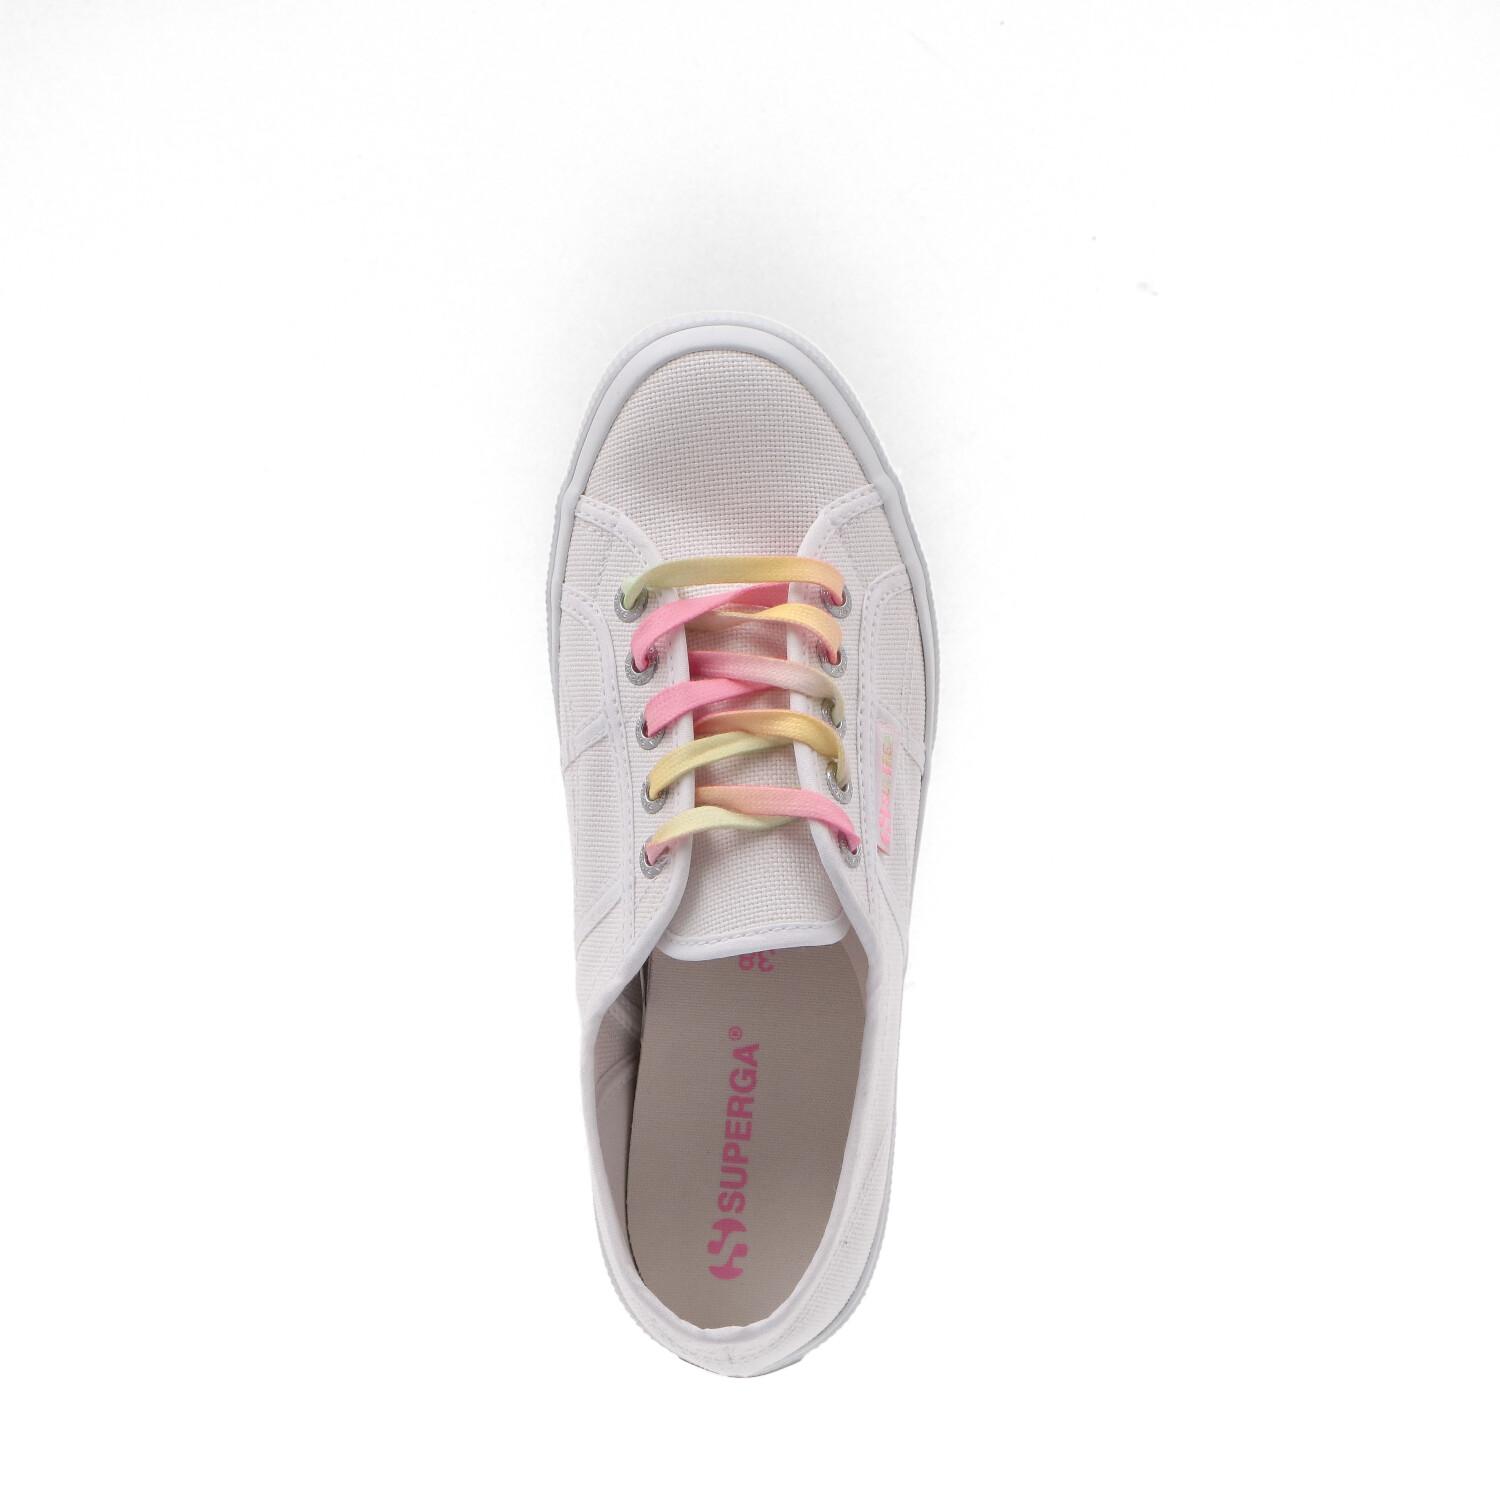 Superga 2750 Shaded Lace WHITE CANDY MULTICOLOR 